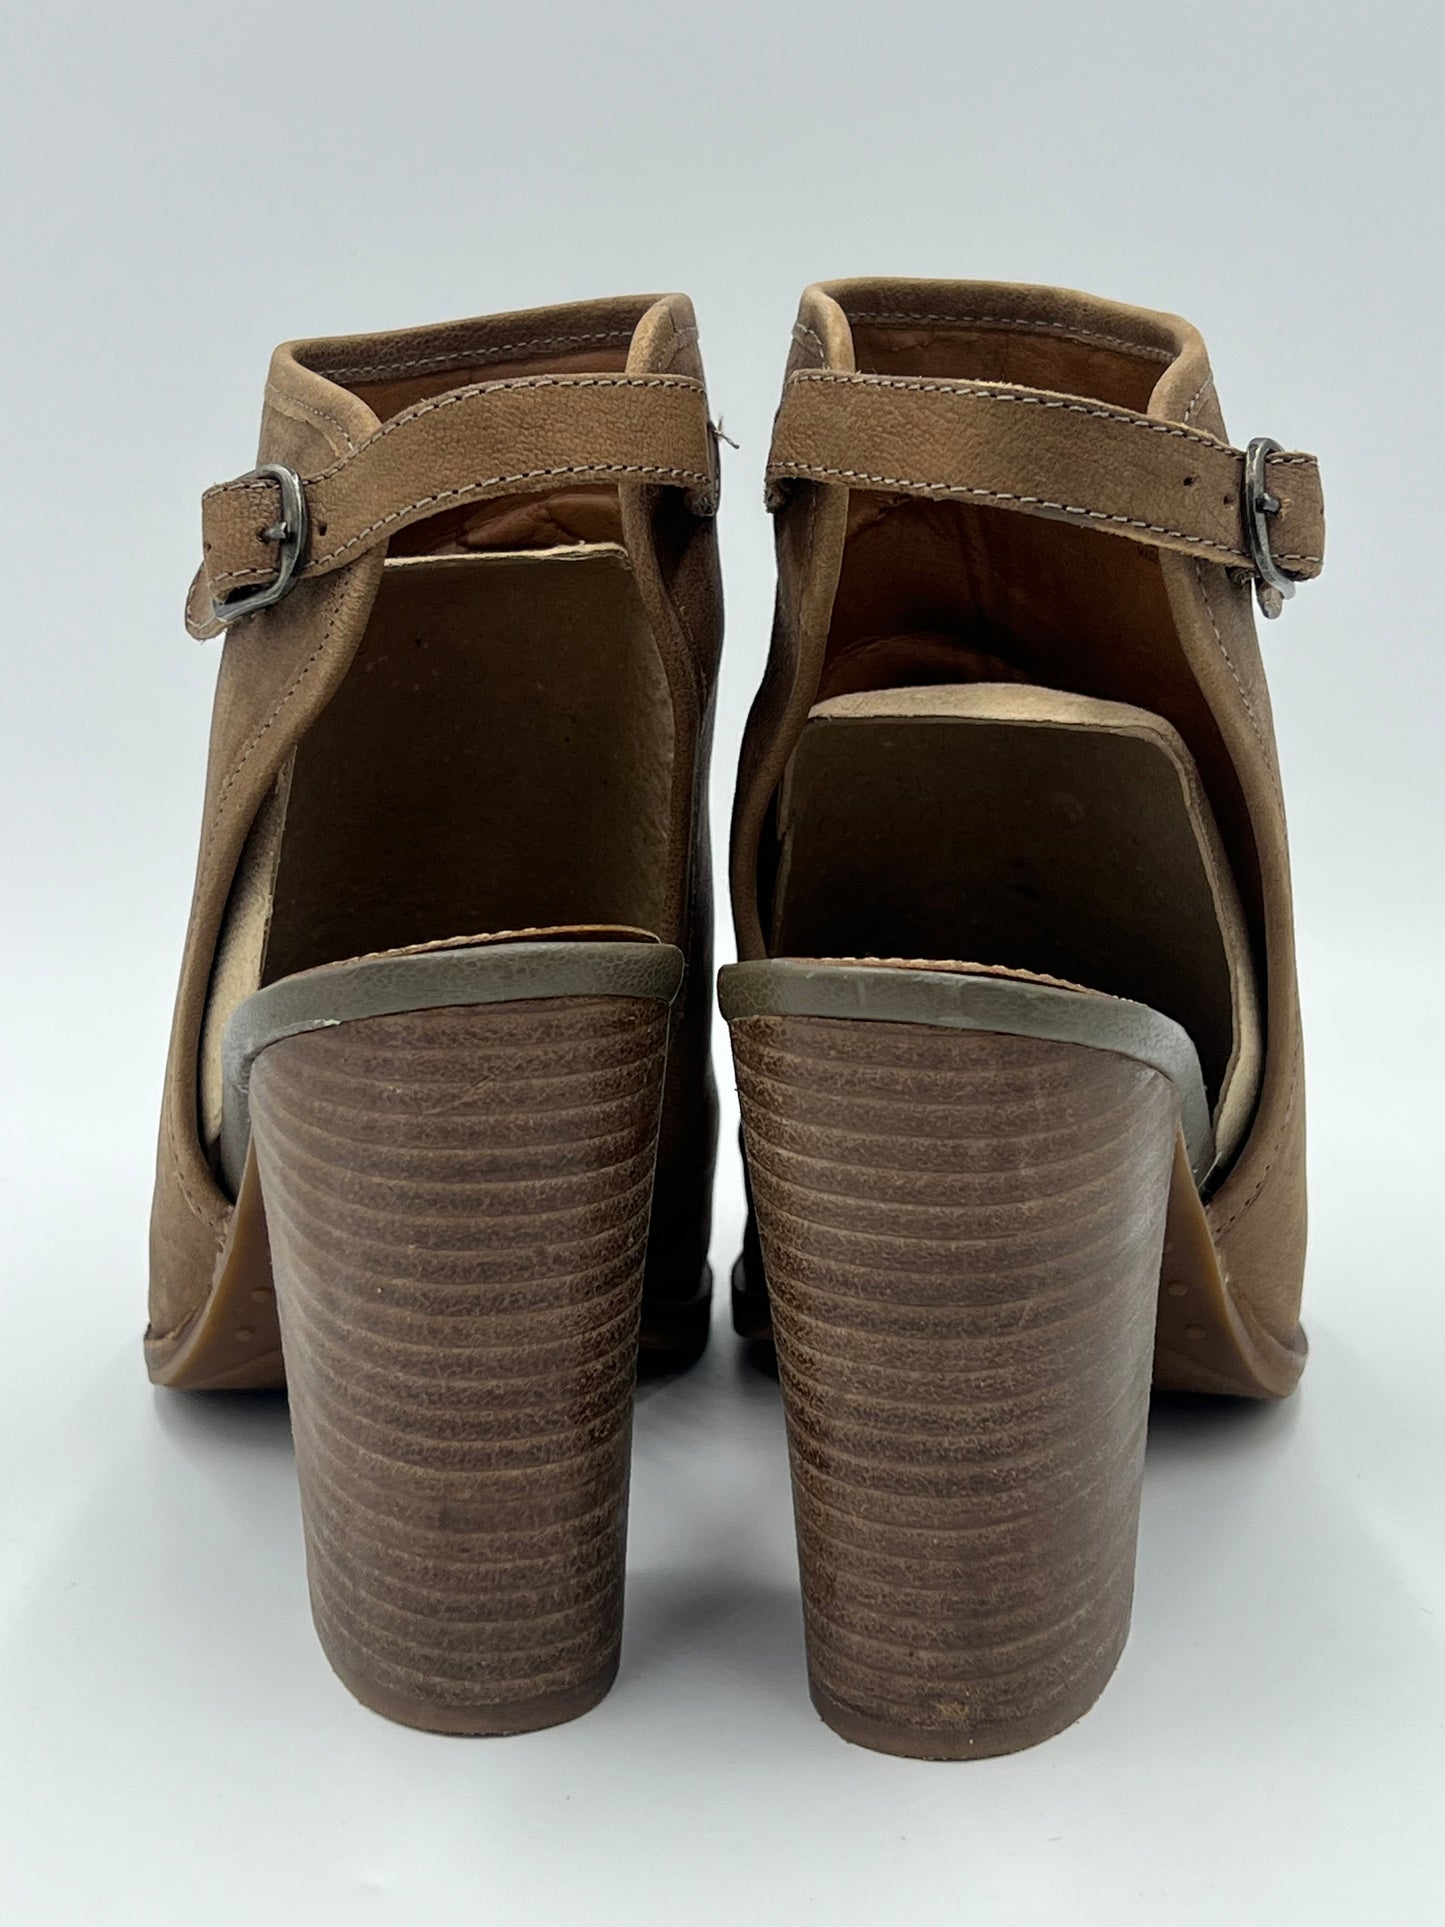 Shoes Heels Block By Lucky Brand  Size: 8.5